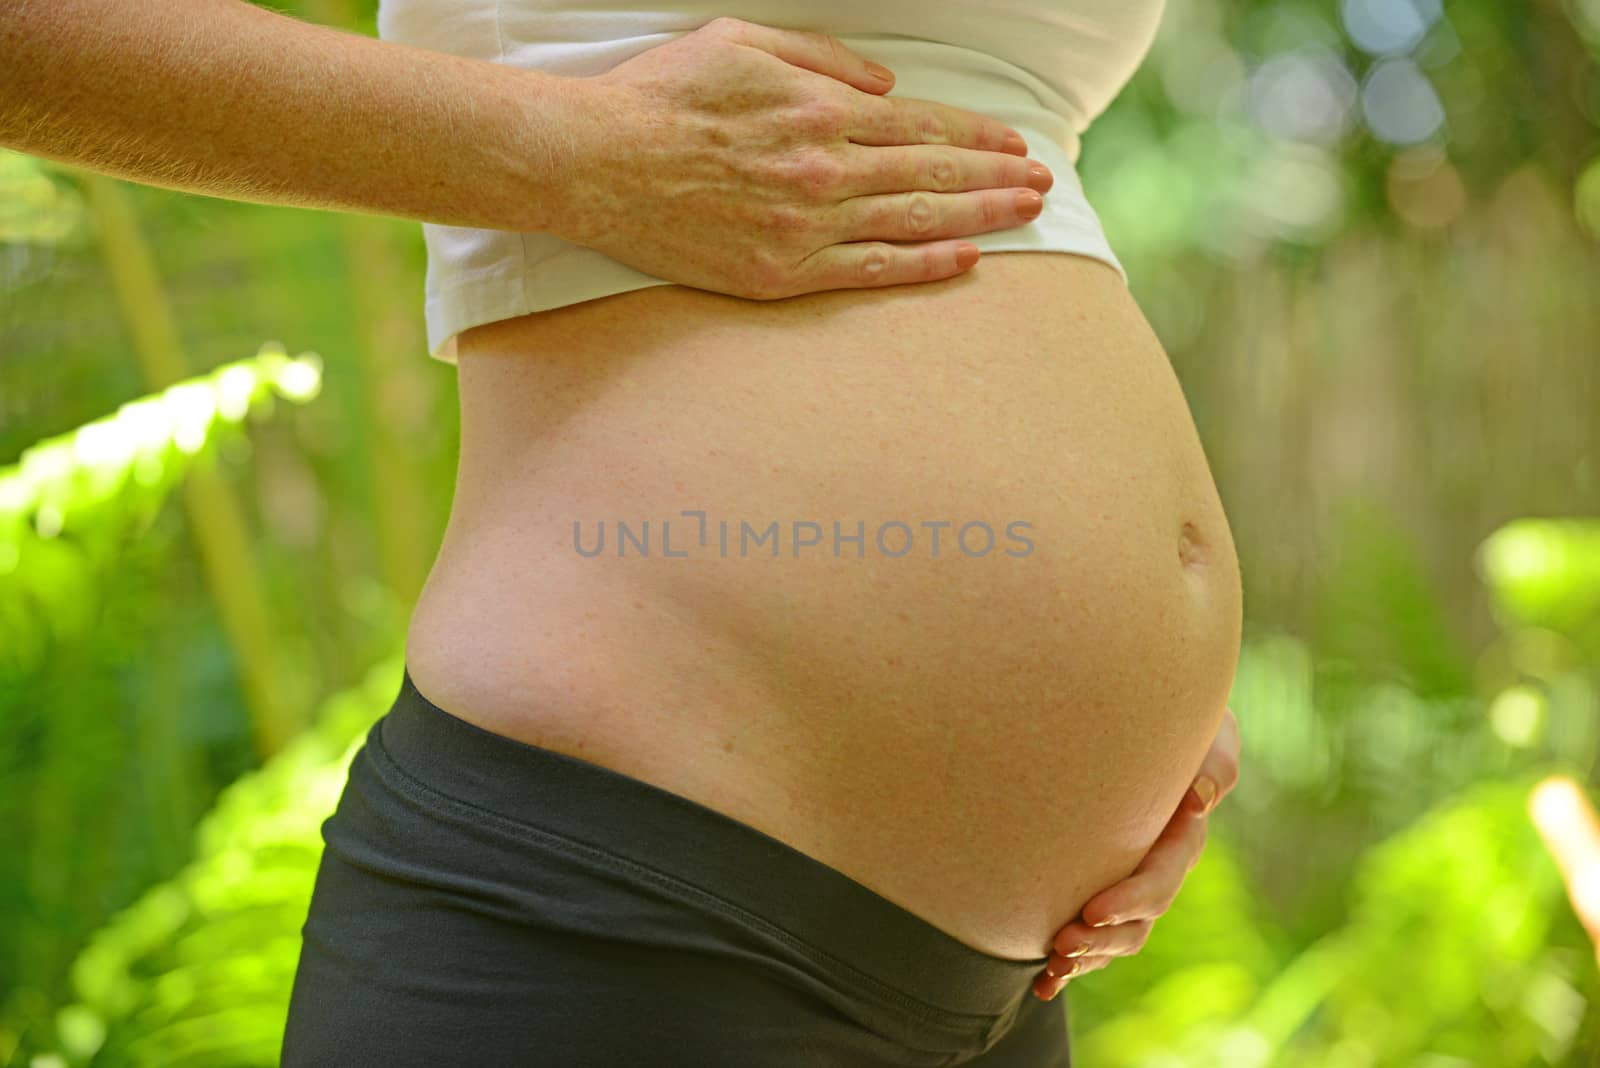 pregnant woman in summertime by ftlaudgirl